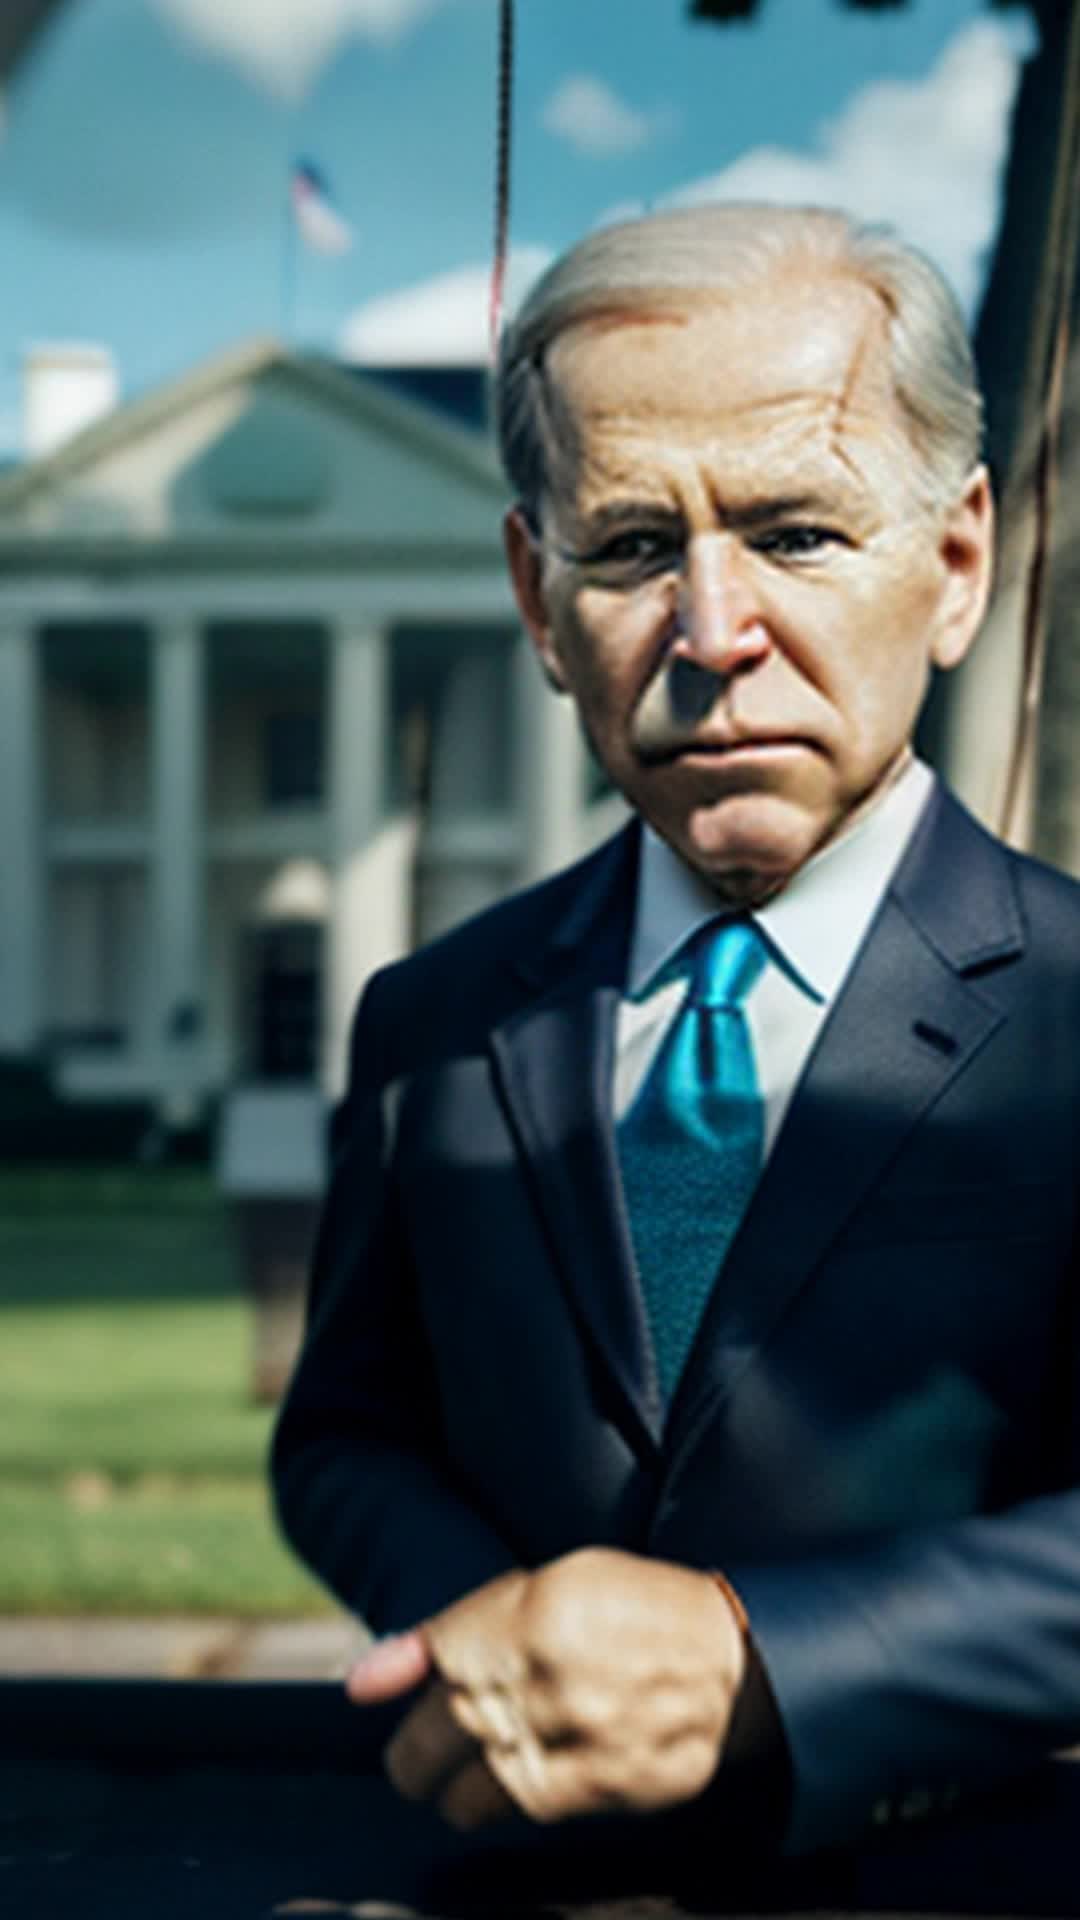 Marionette of President Joe Biden, manipulated by strings, detailed face, realistic movements, formal suit, on the White House lawn setting, soft shadows, wideangle shot, dramatic lighting, high fidelity, crisp resolution, subtle background music adding eerie atmosphere, slow and deliberate movements for added tension, full view of president being pulled on strings, silky smooth animation, high frame rate for lifelike motion